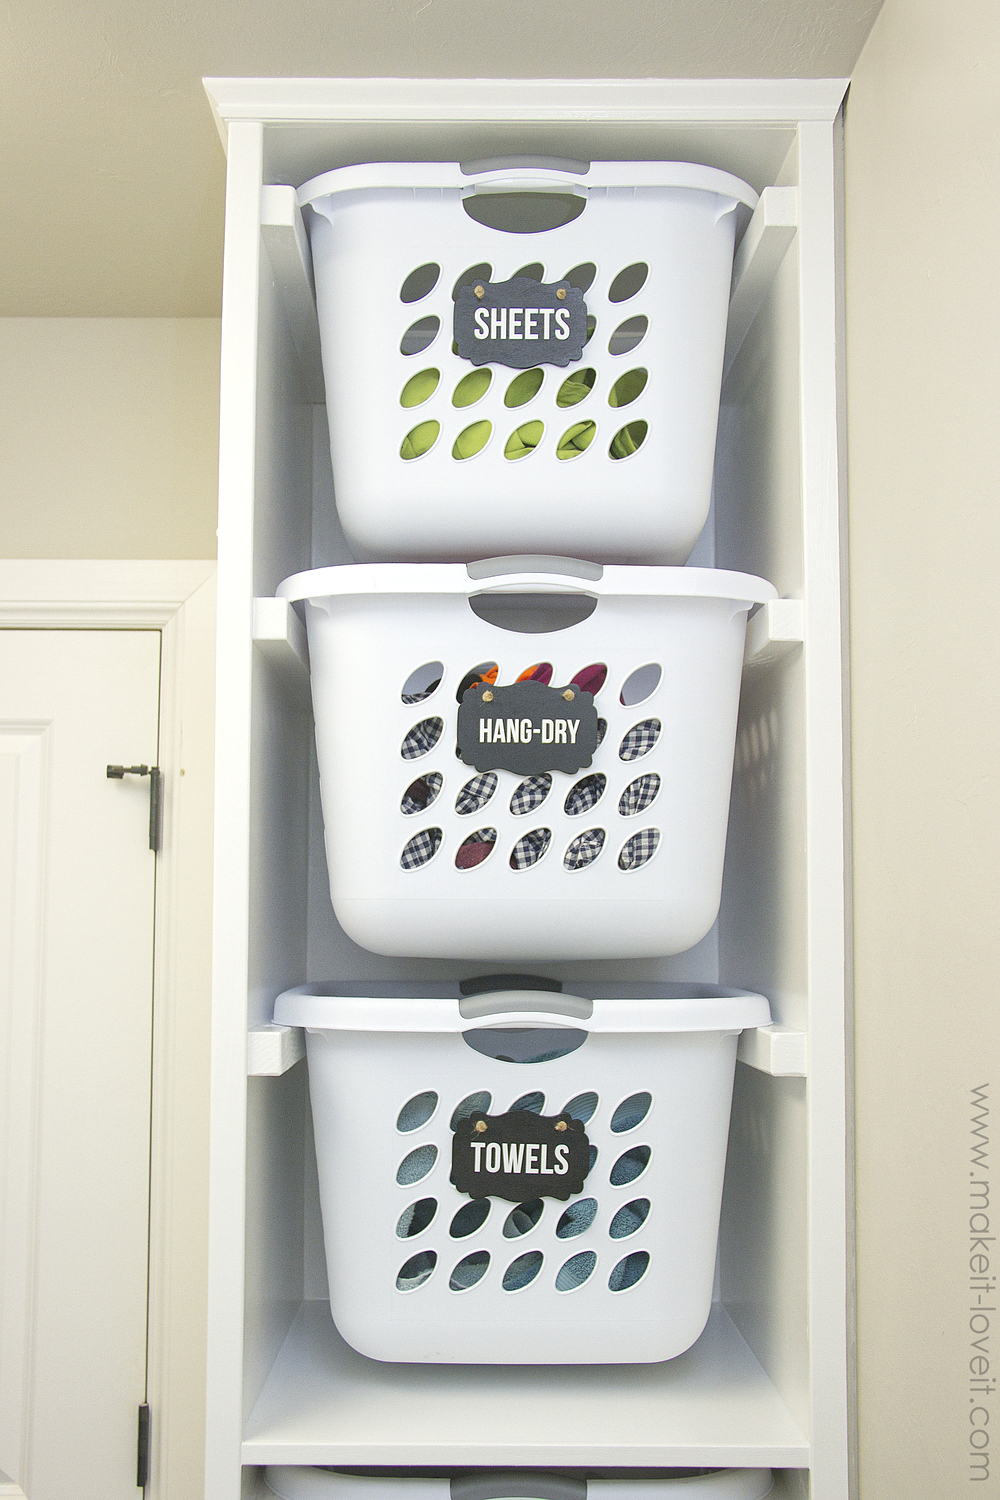 DIY Laundry Basket Organizer (...Built In) | Make It and Love It